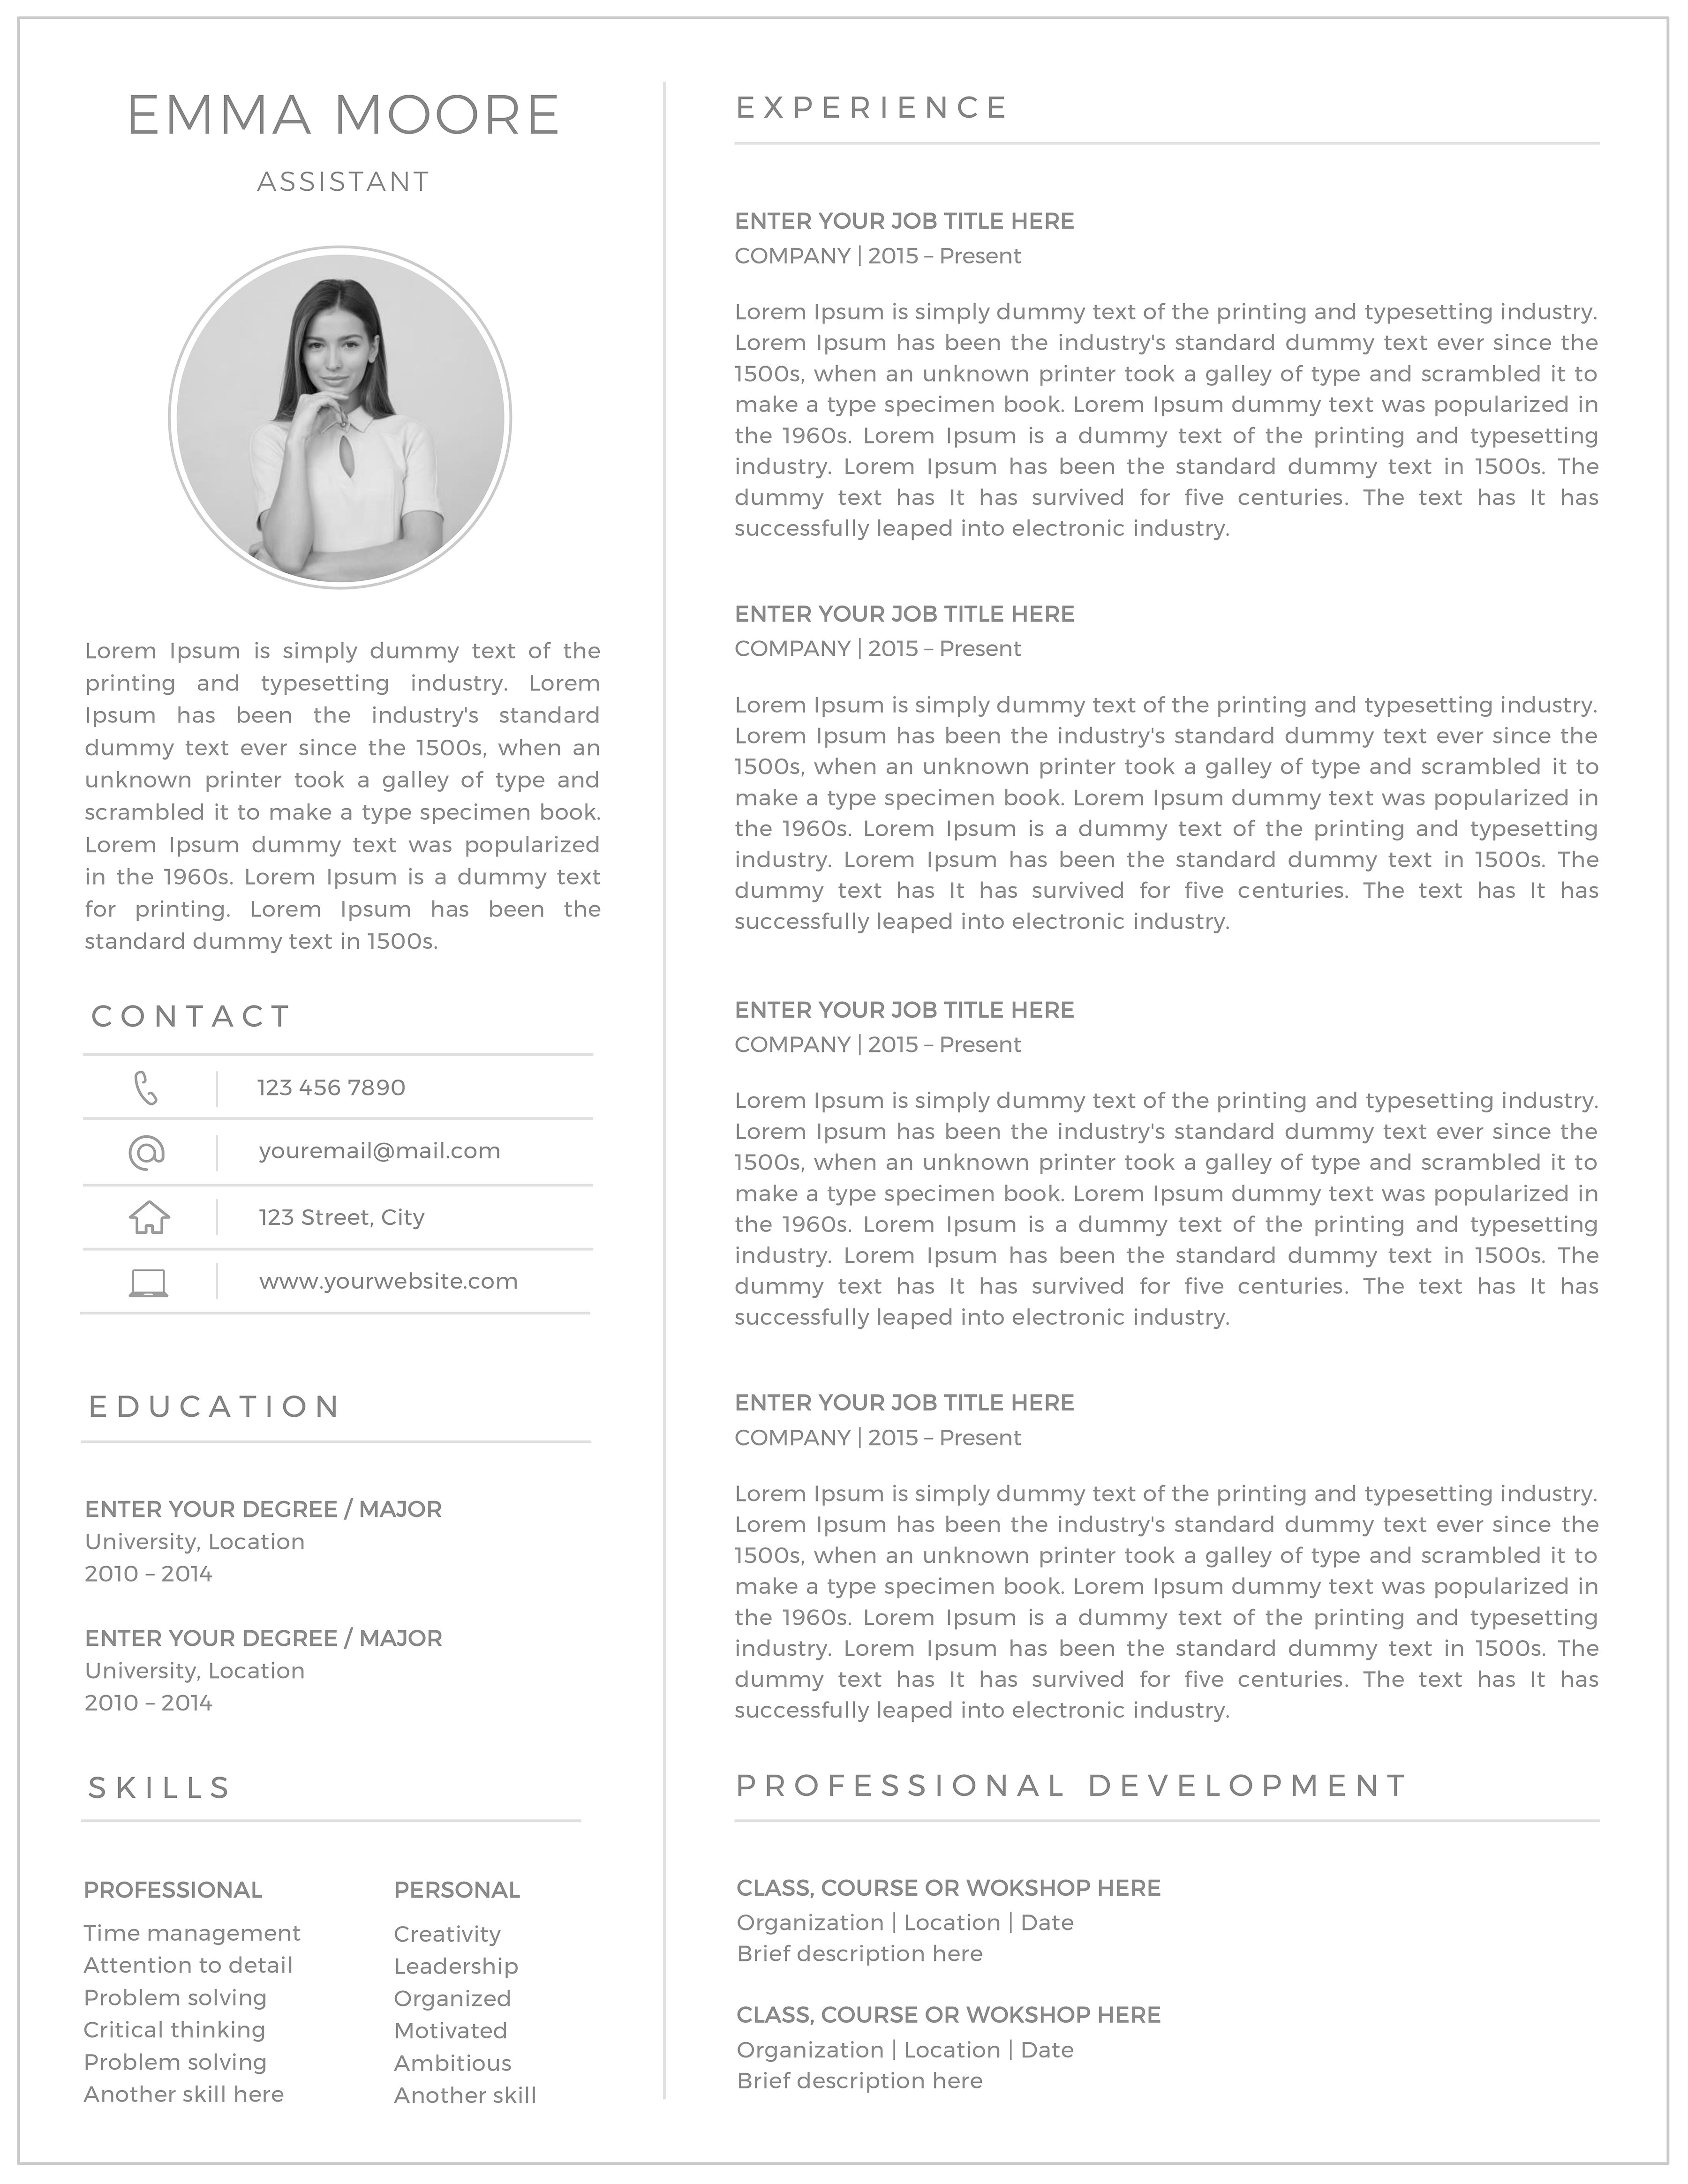 Professional resume template with a white background.